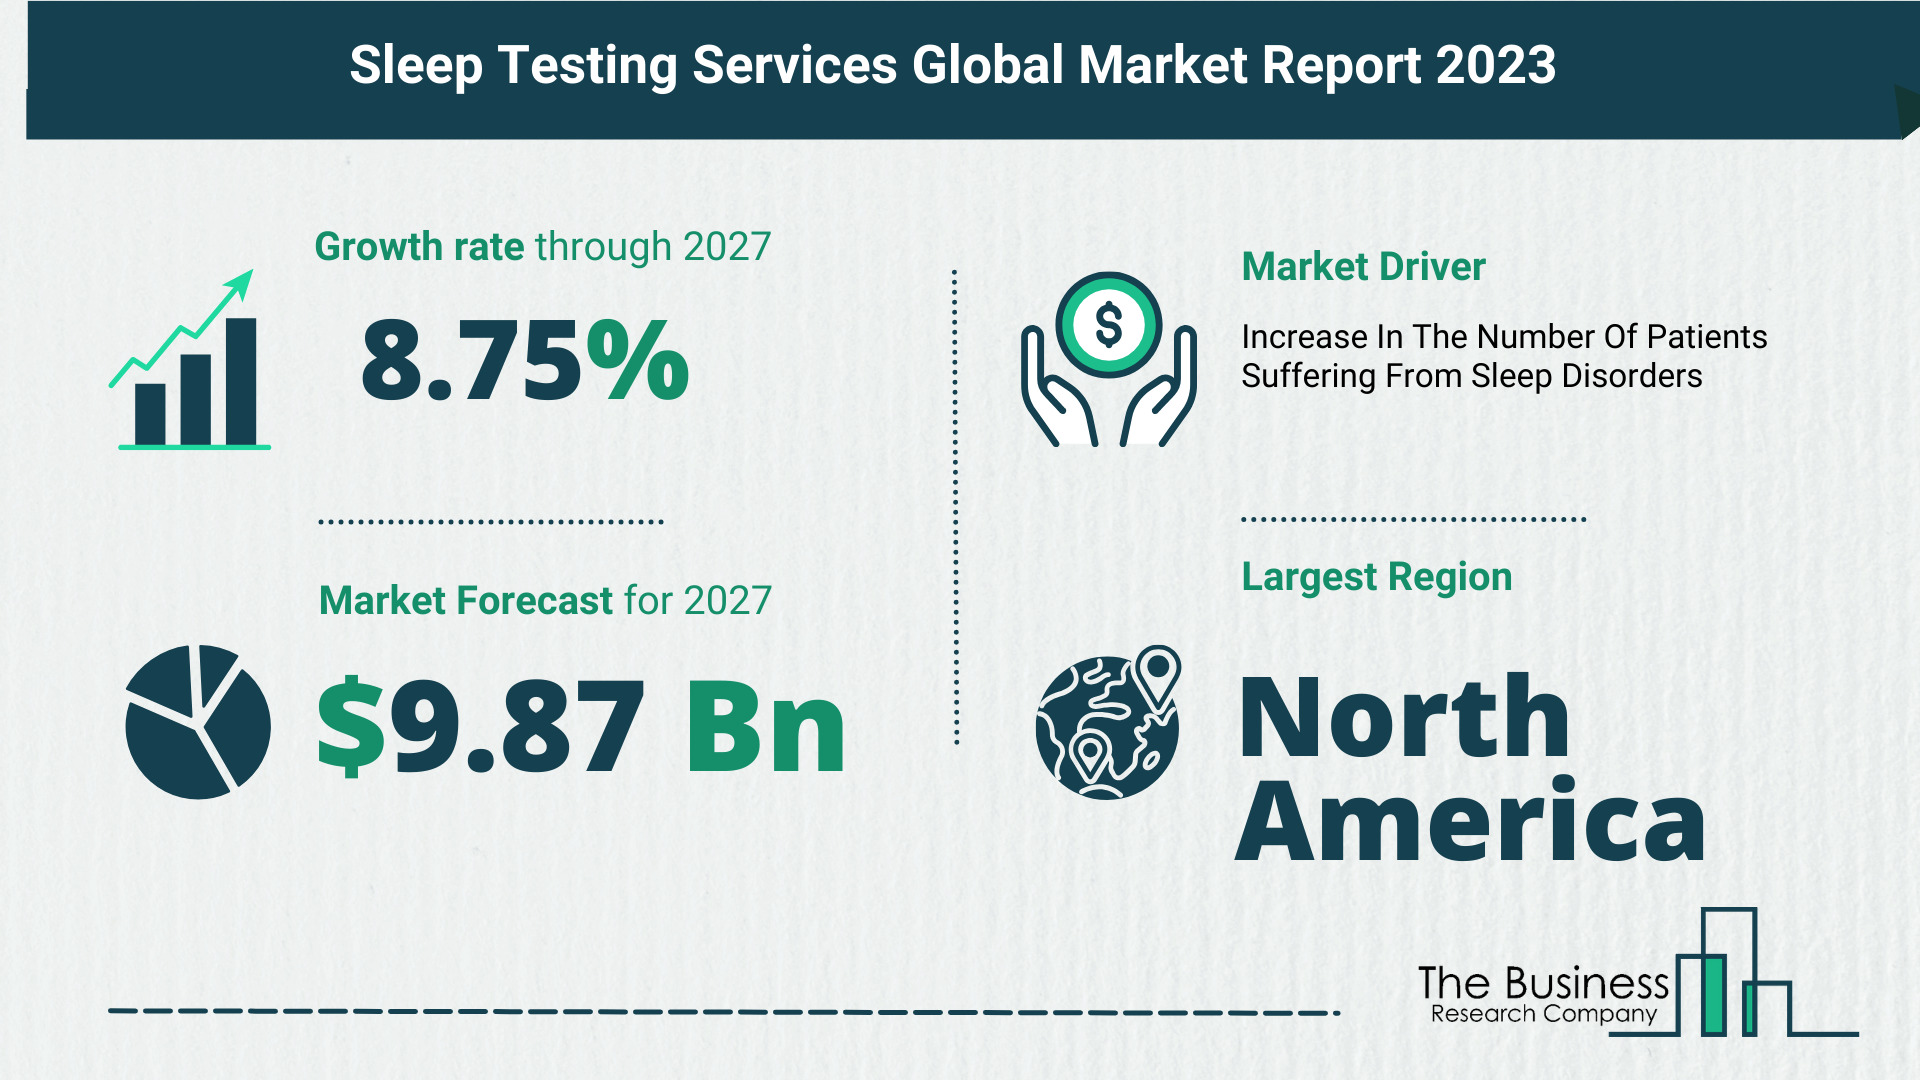 What Is The Forecast Growth Rate For The Sleep Testing Services Market?